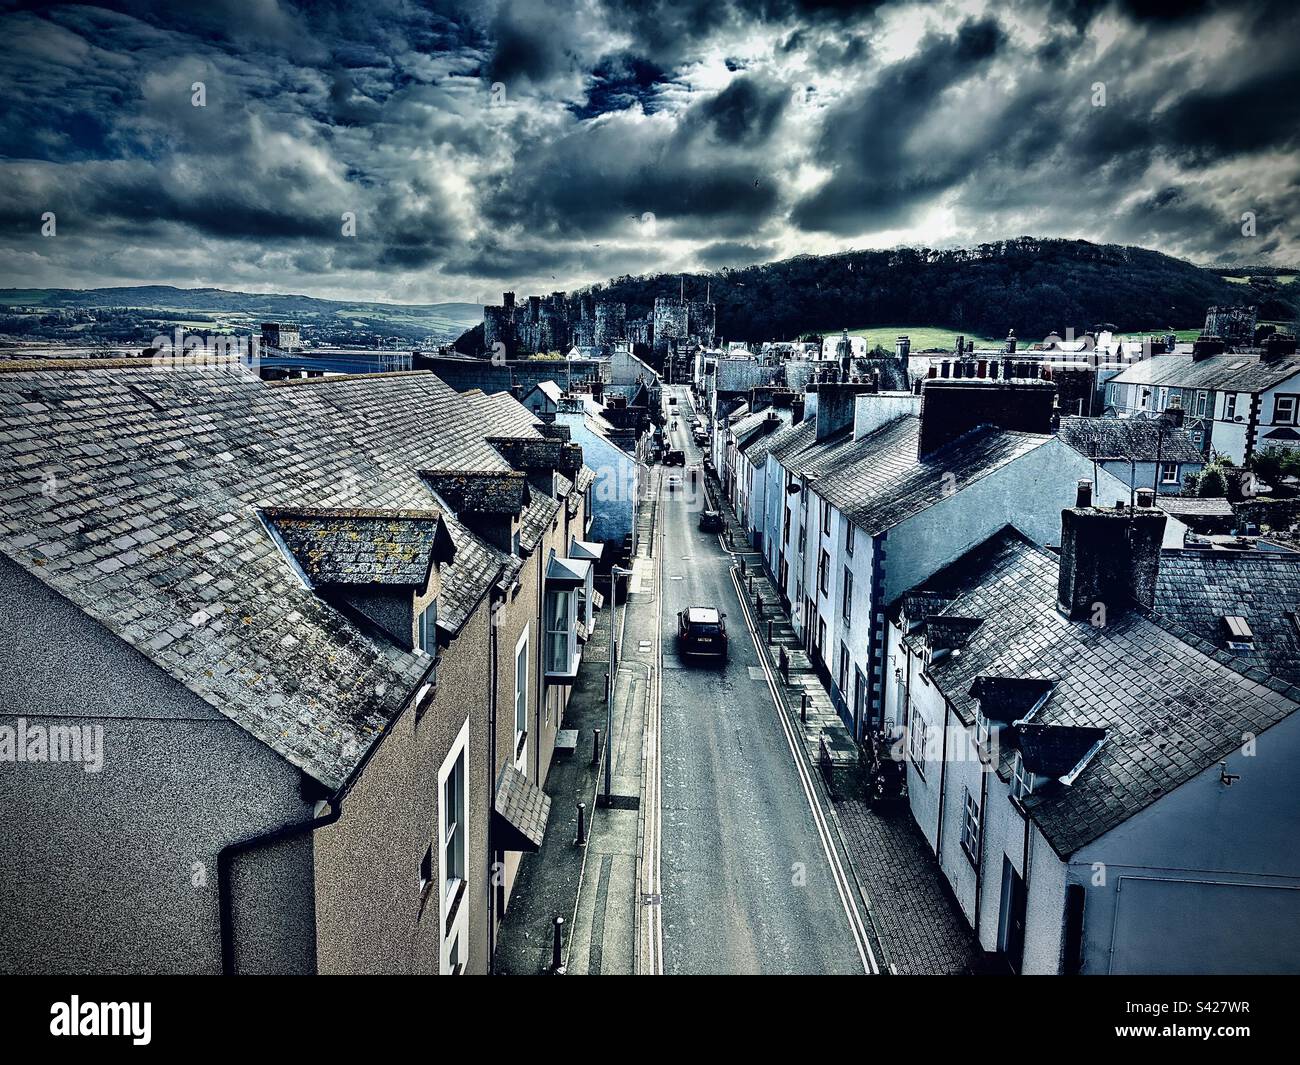 Inside The Walls - Conwy, Wales Stock Photo